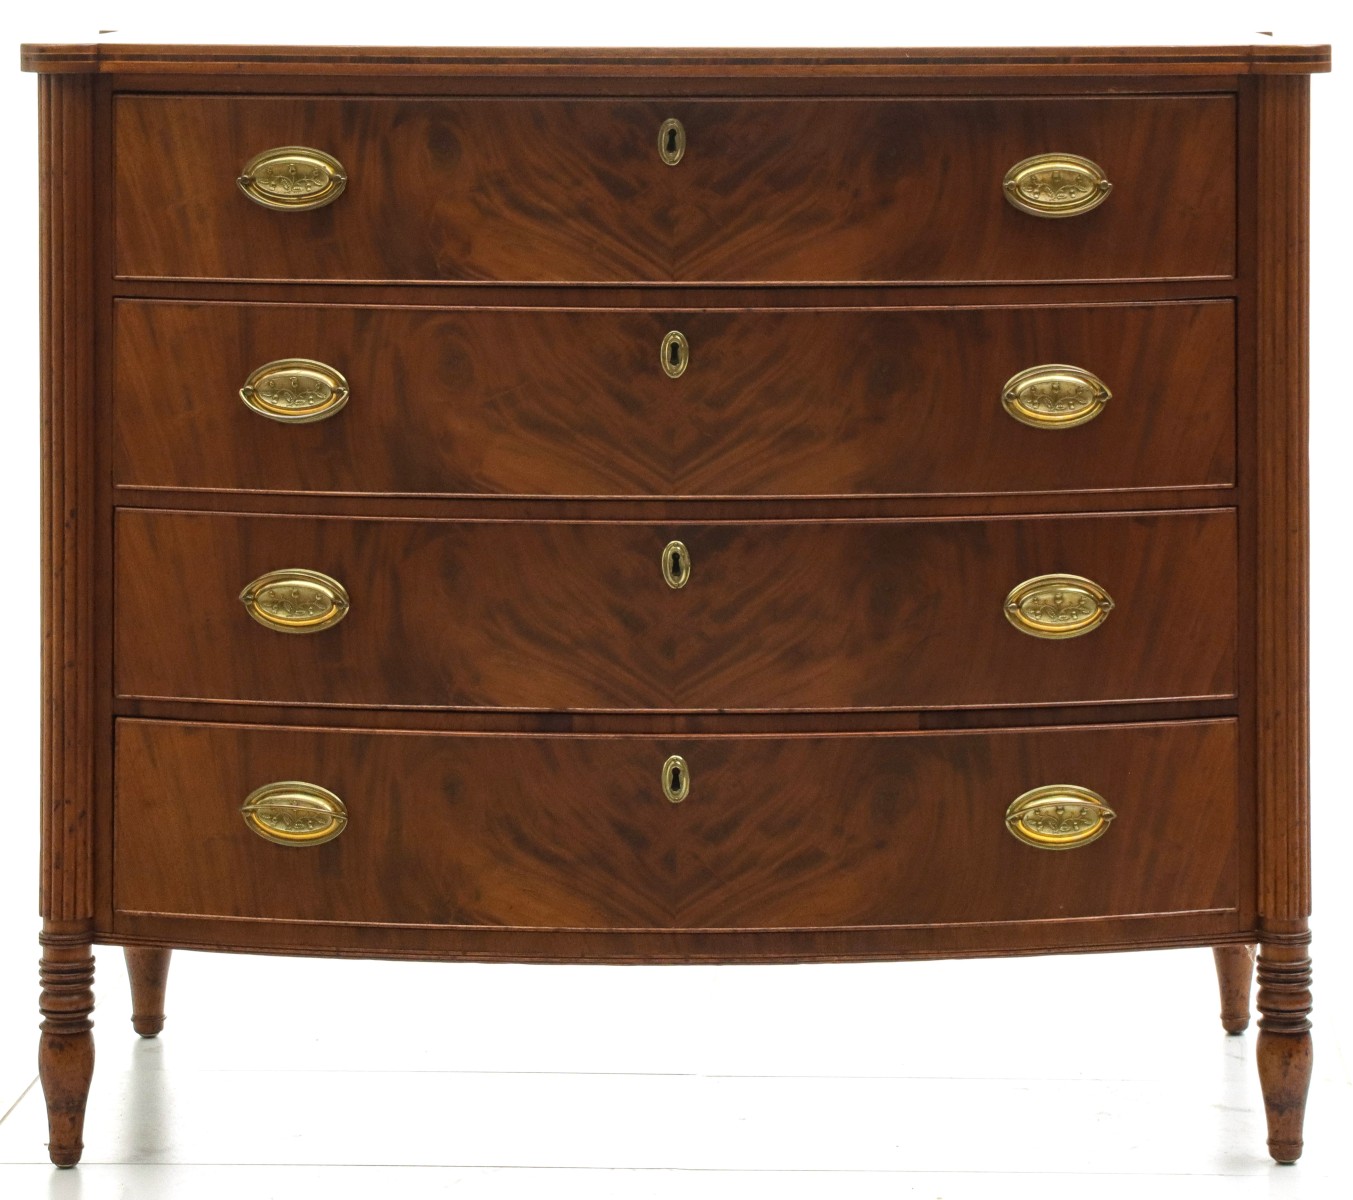 AN EARLY 19TH C. AMERICAN SHERATON STYLE CHEST